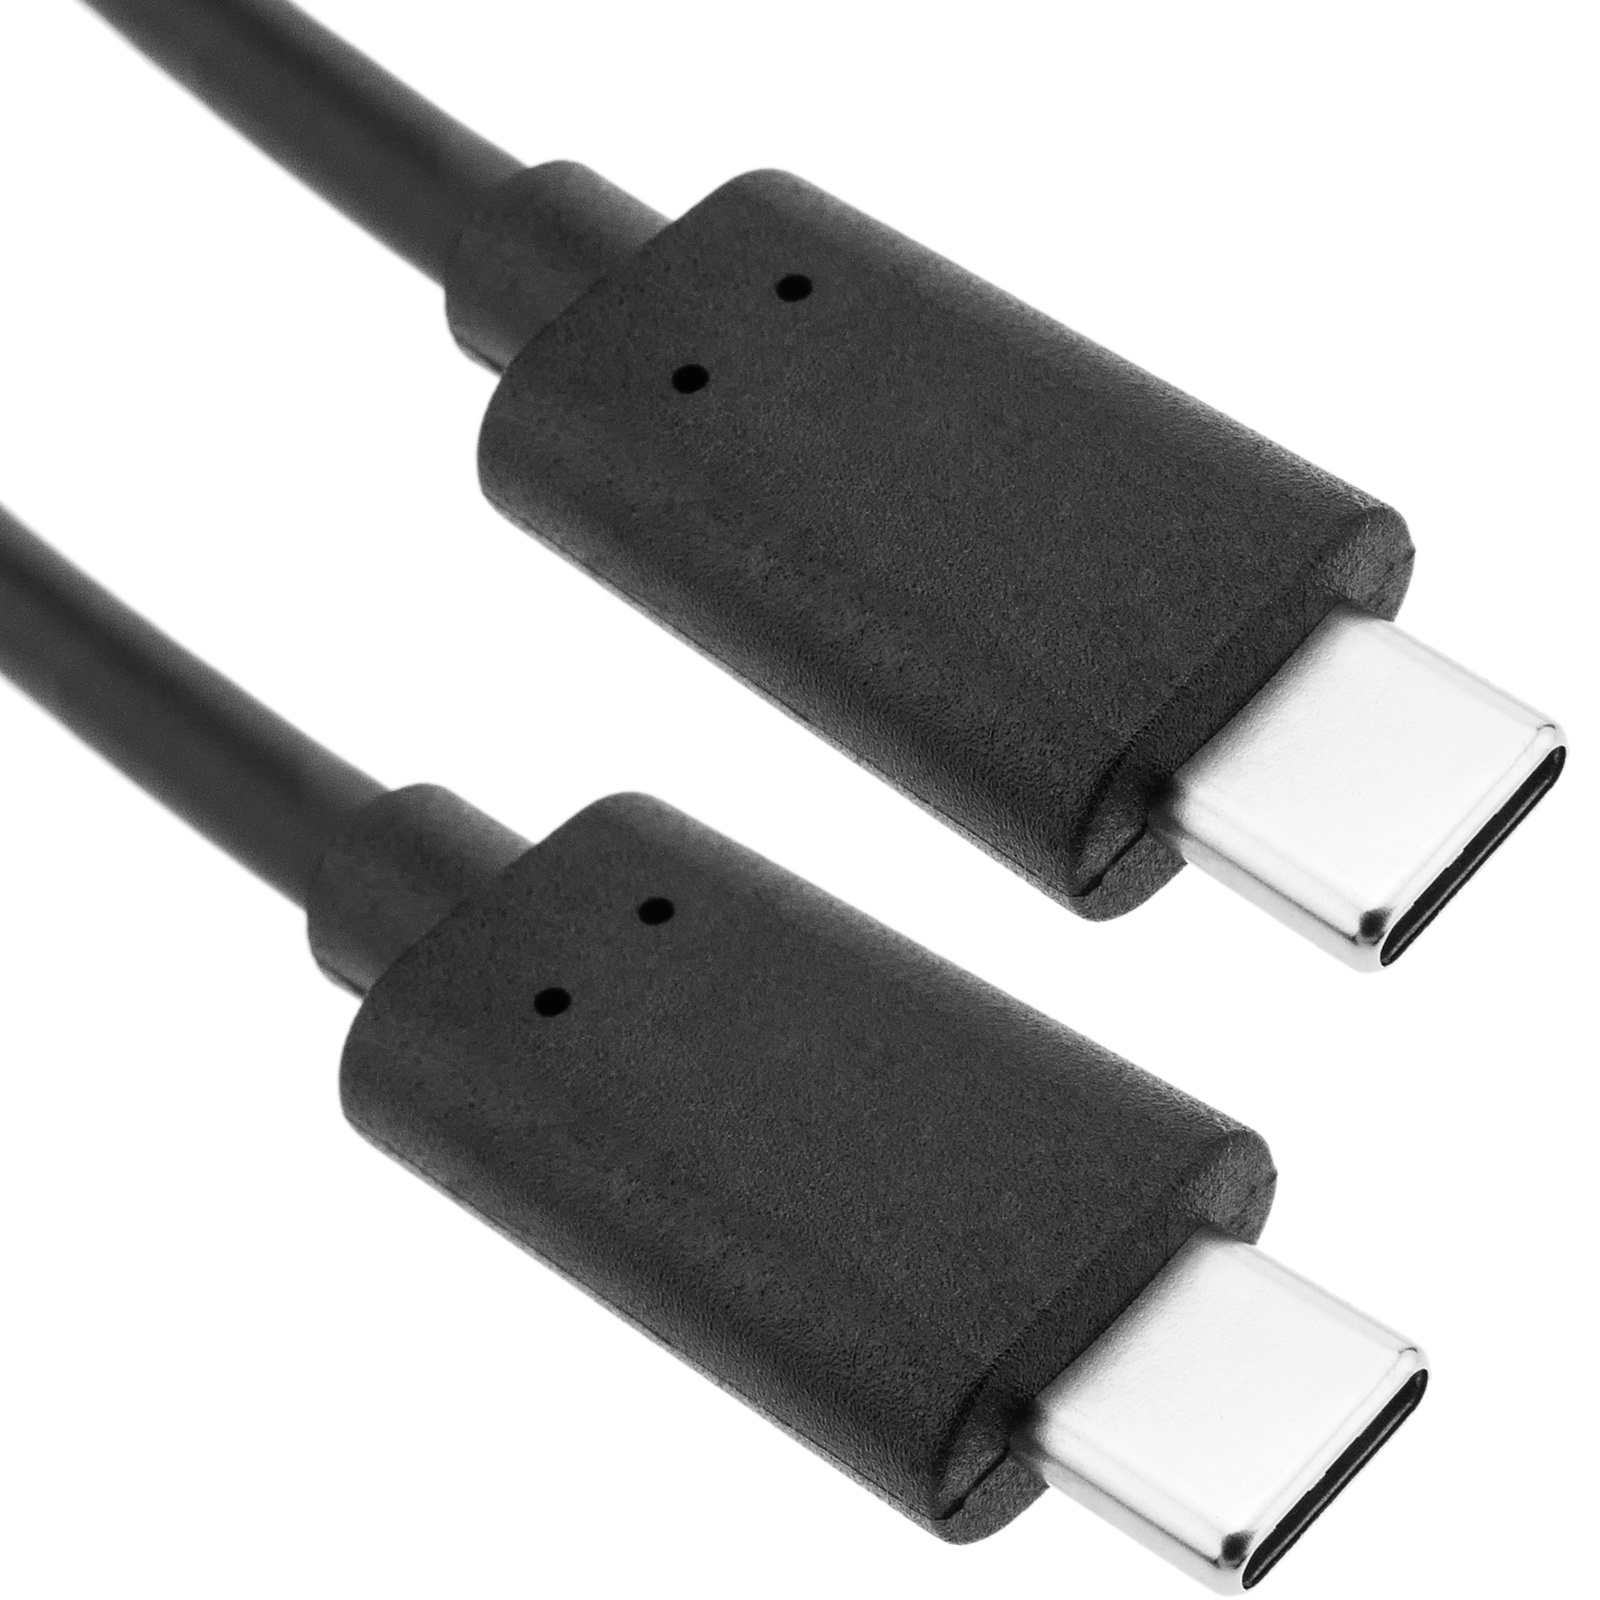 White USB-C USB 3.1 Type C Male to USB 3.1 Type C Male 2M Extension Data Cable 